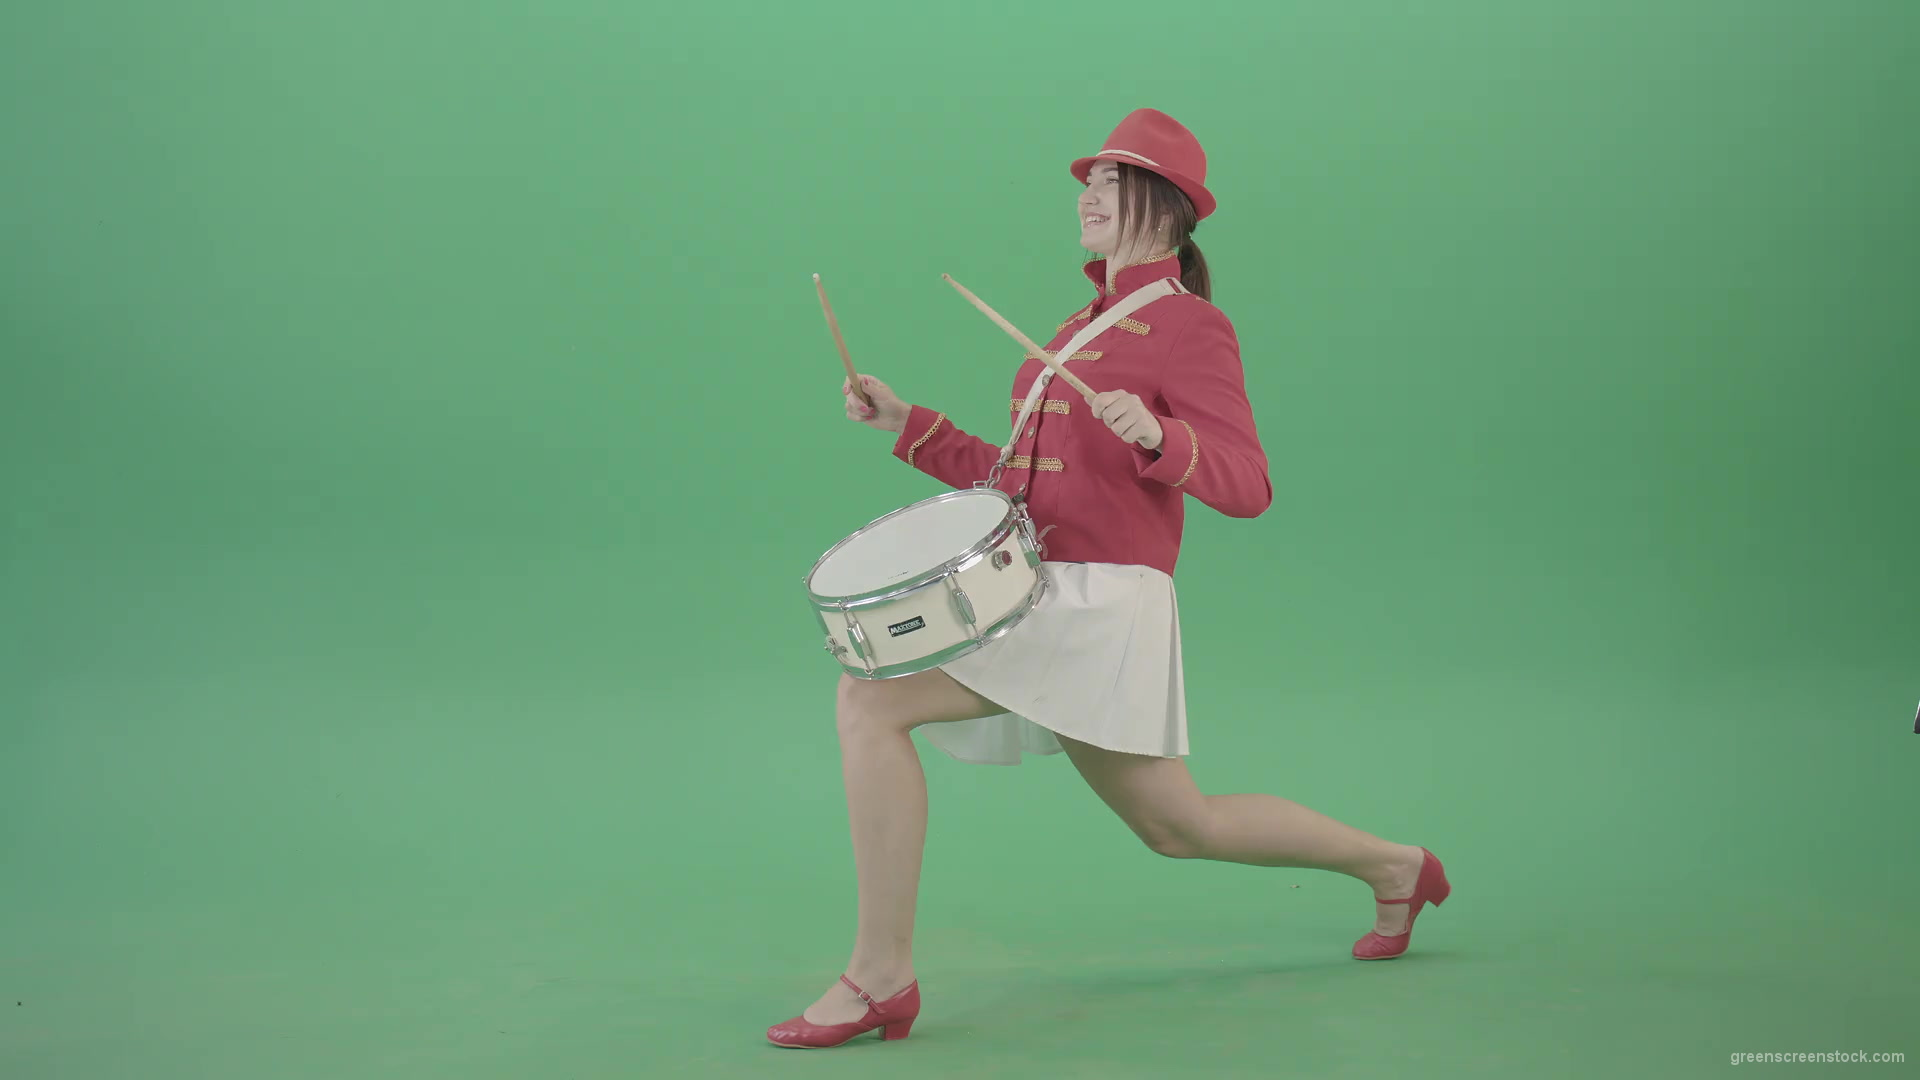 Stupid-funny-advertising-video-footage-with-drumming-girl-isolated-on-green-screen-4K-Video-Footage-1920_001 Green Screen Stock